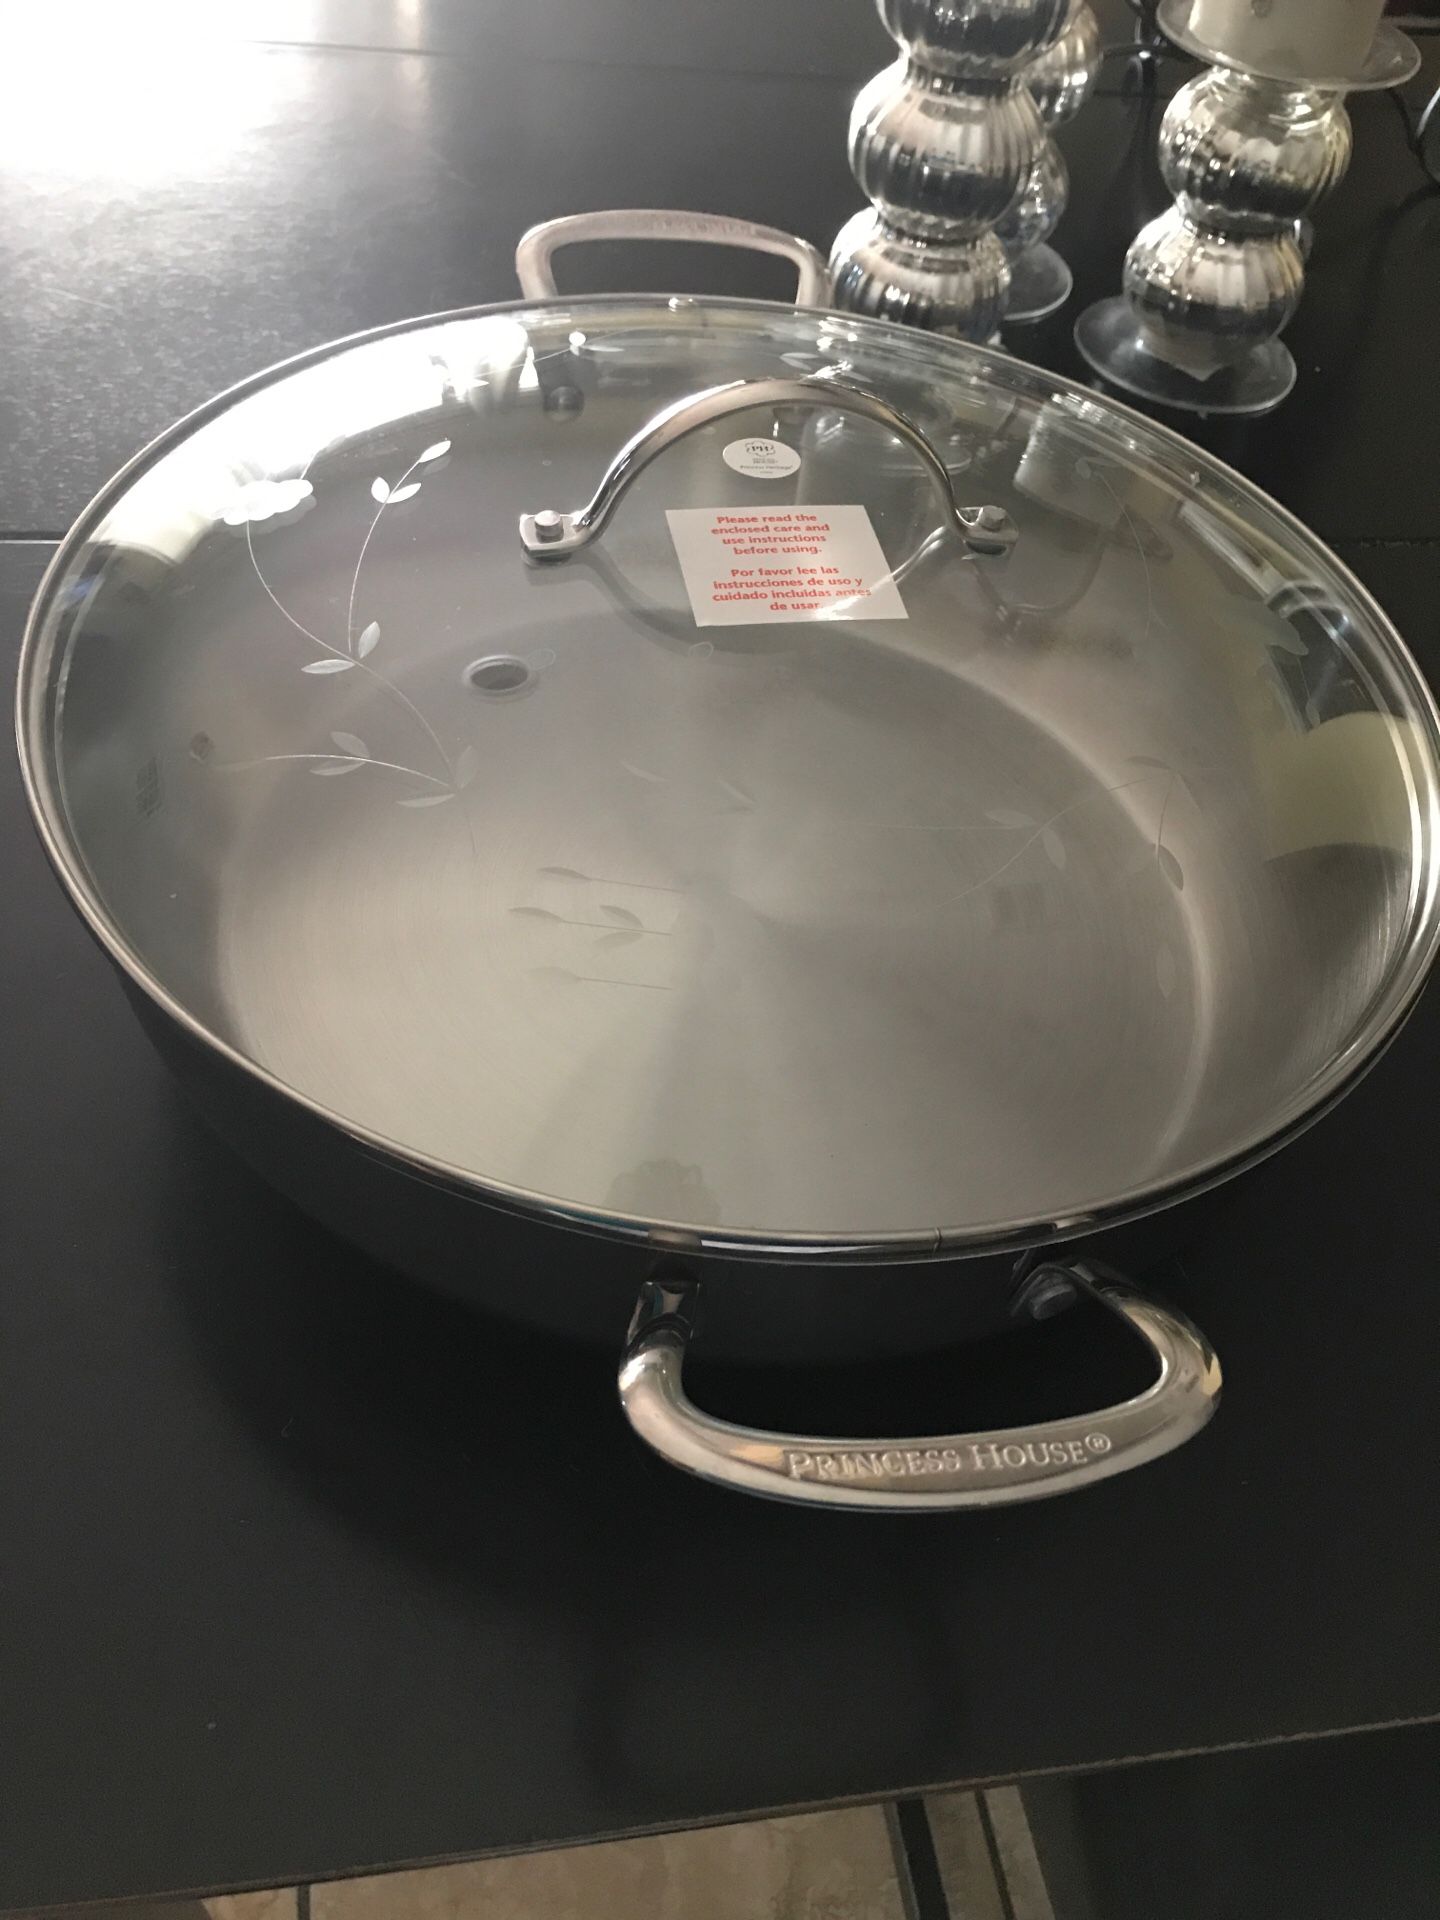 Brand new princess house cooking pan never used